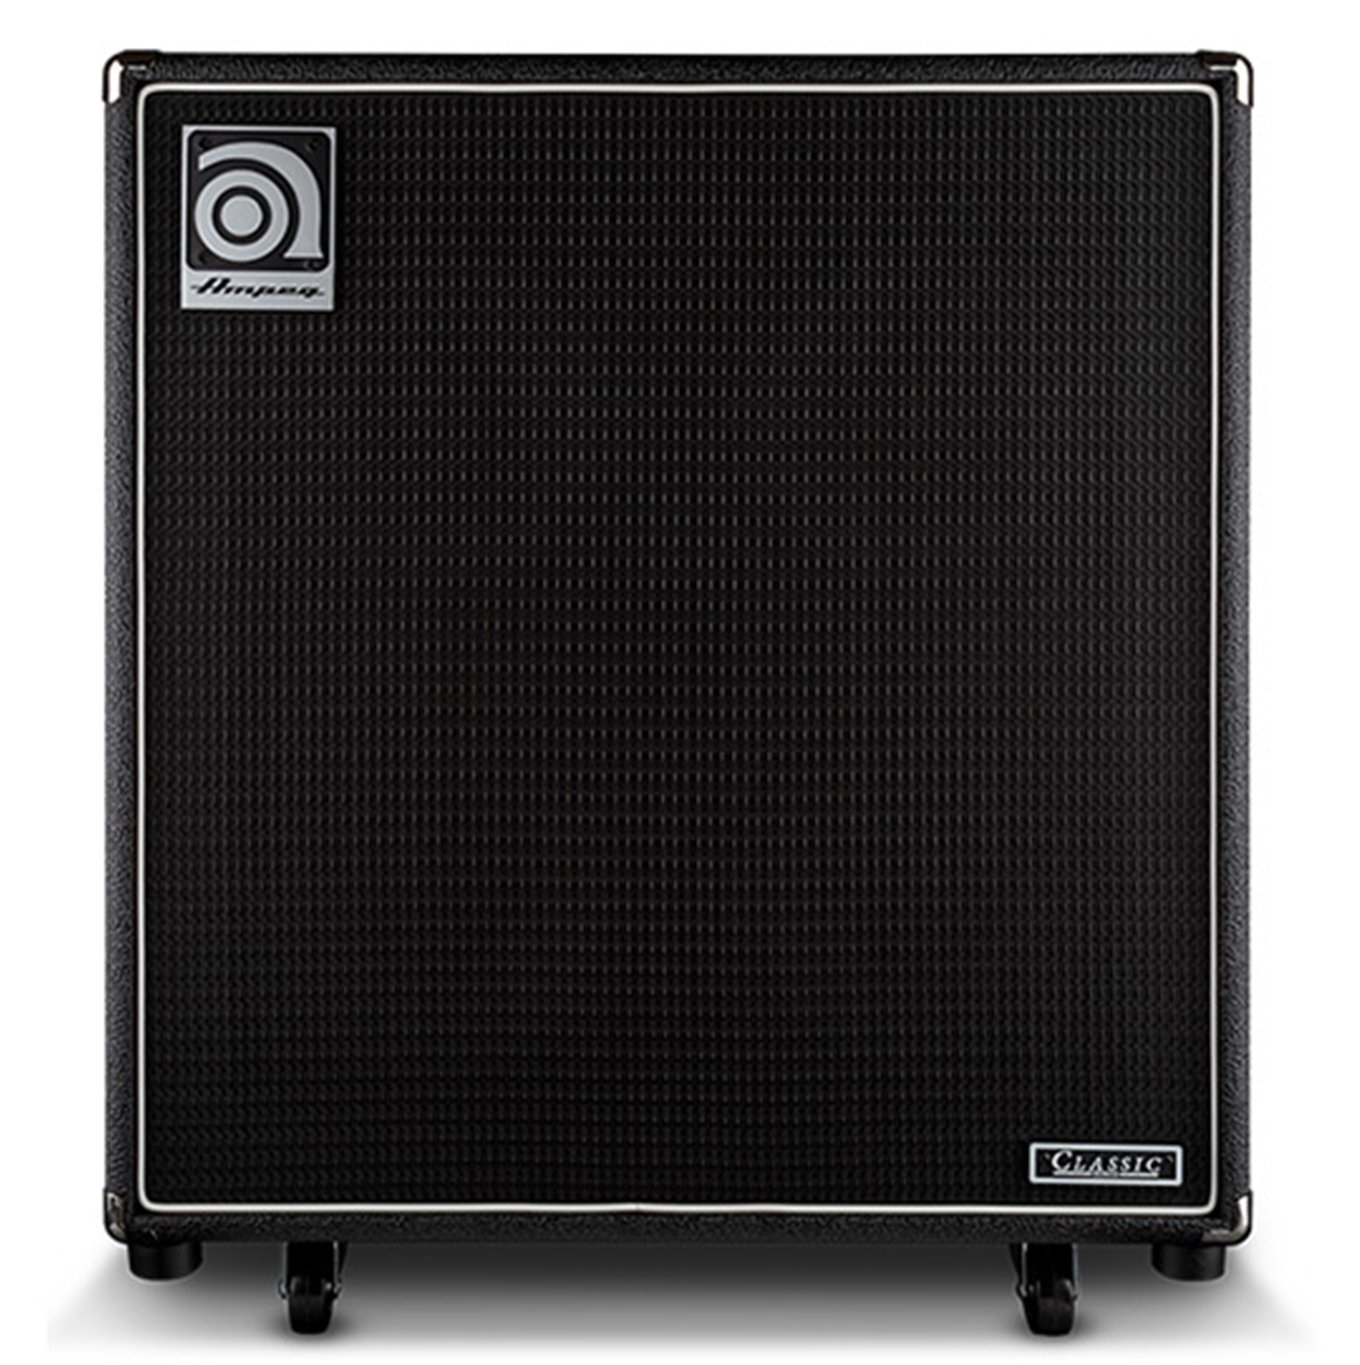 Ampeg SVT-410HE   500W RMS, 4x10"  Horn Loaded Bass Cabinet